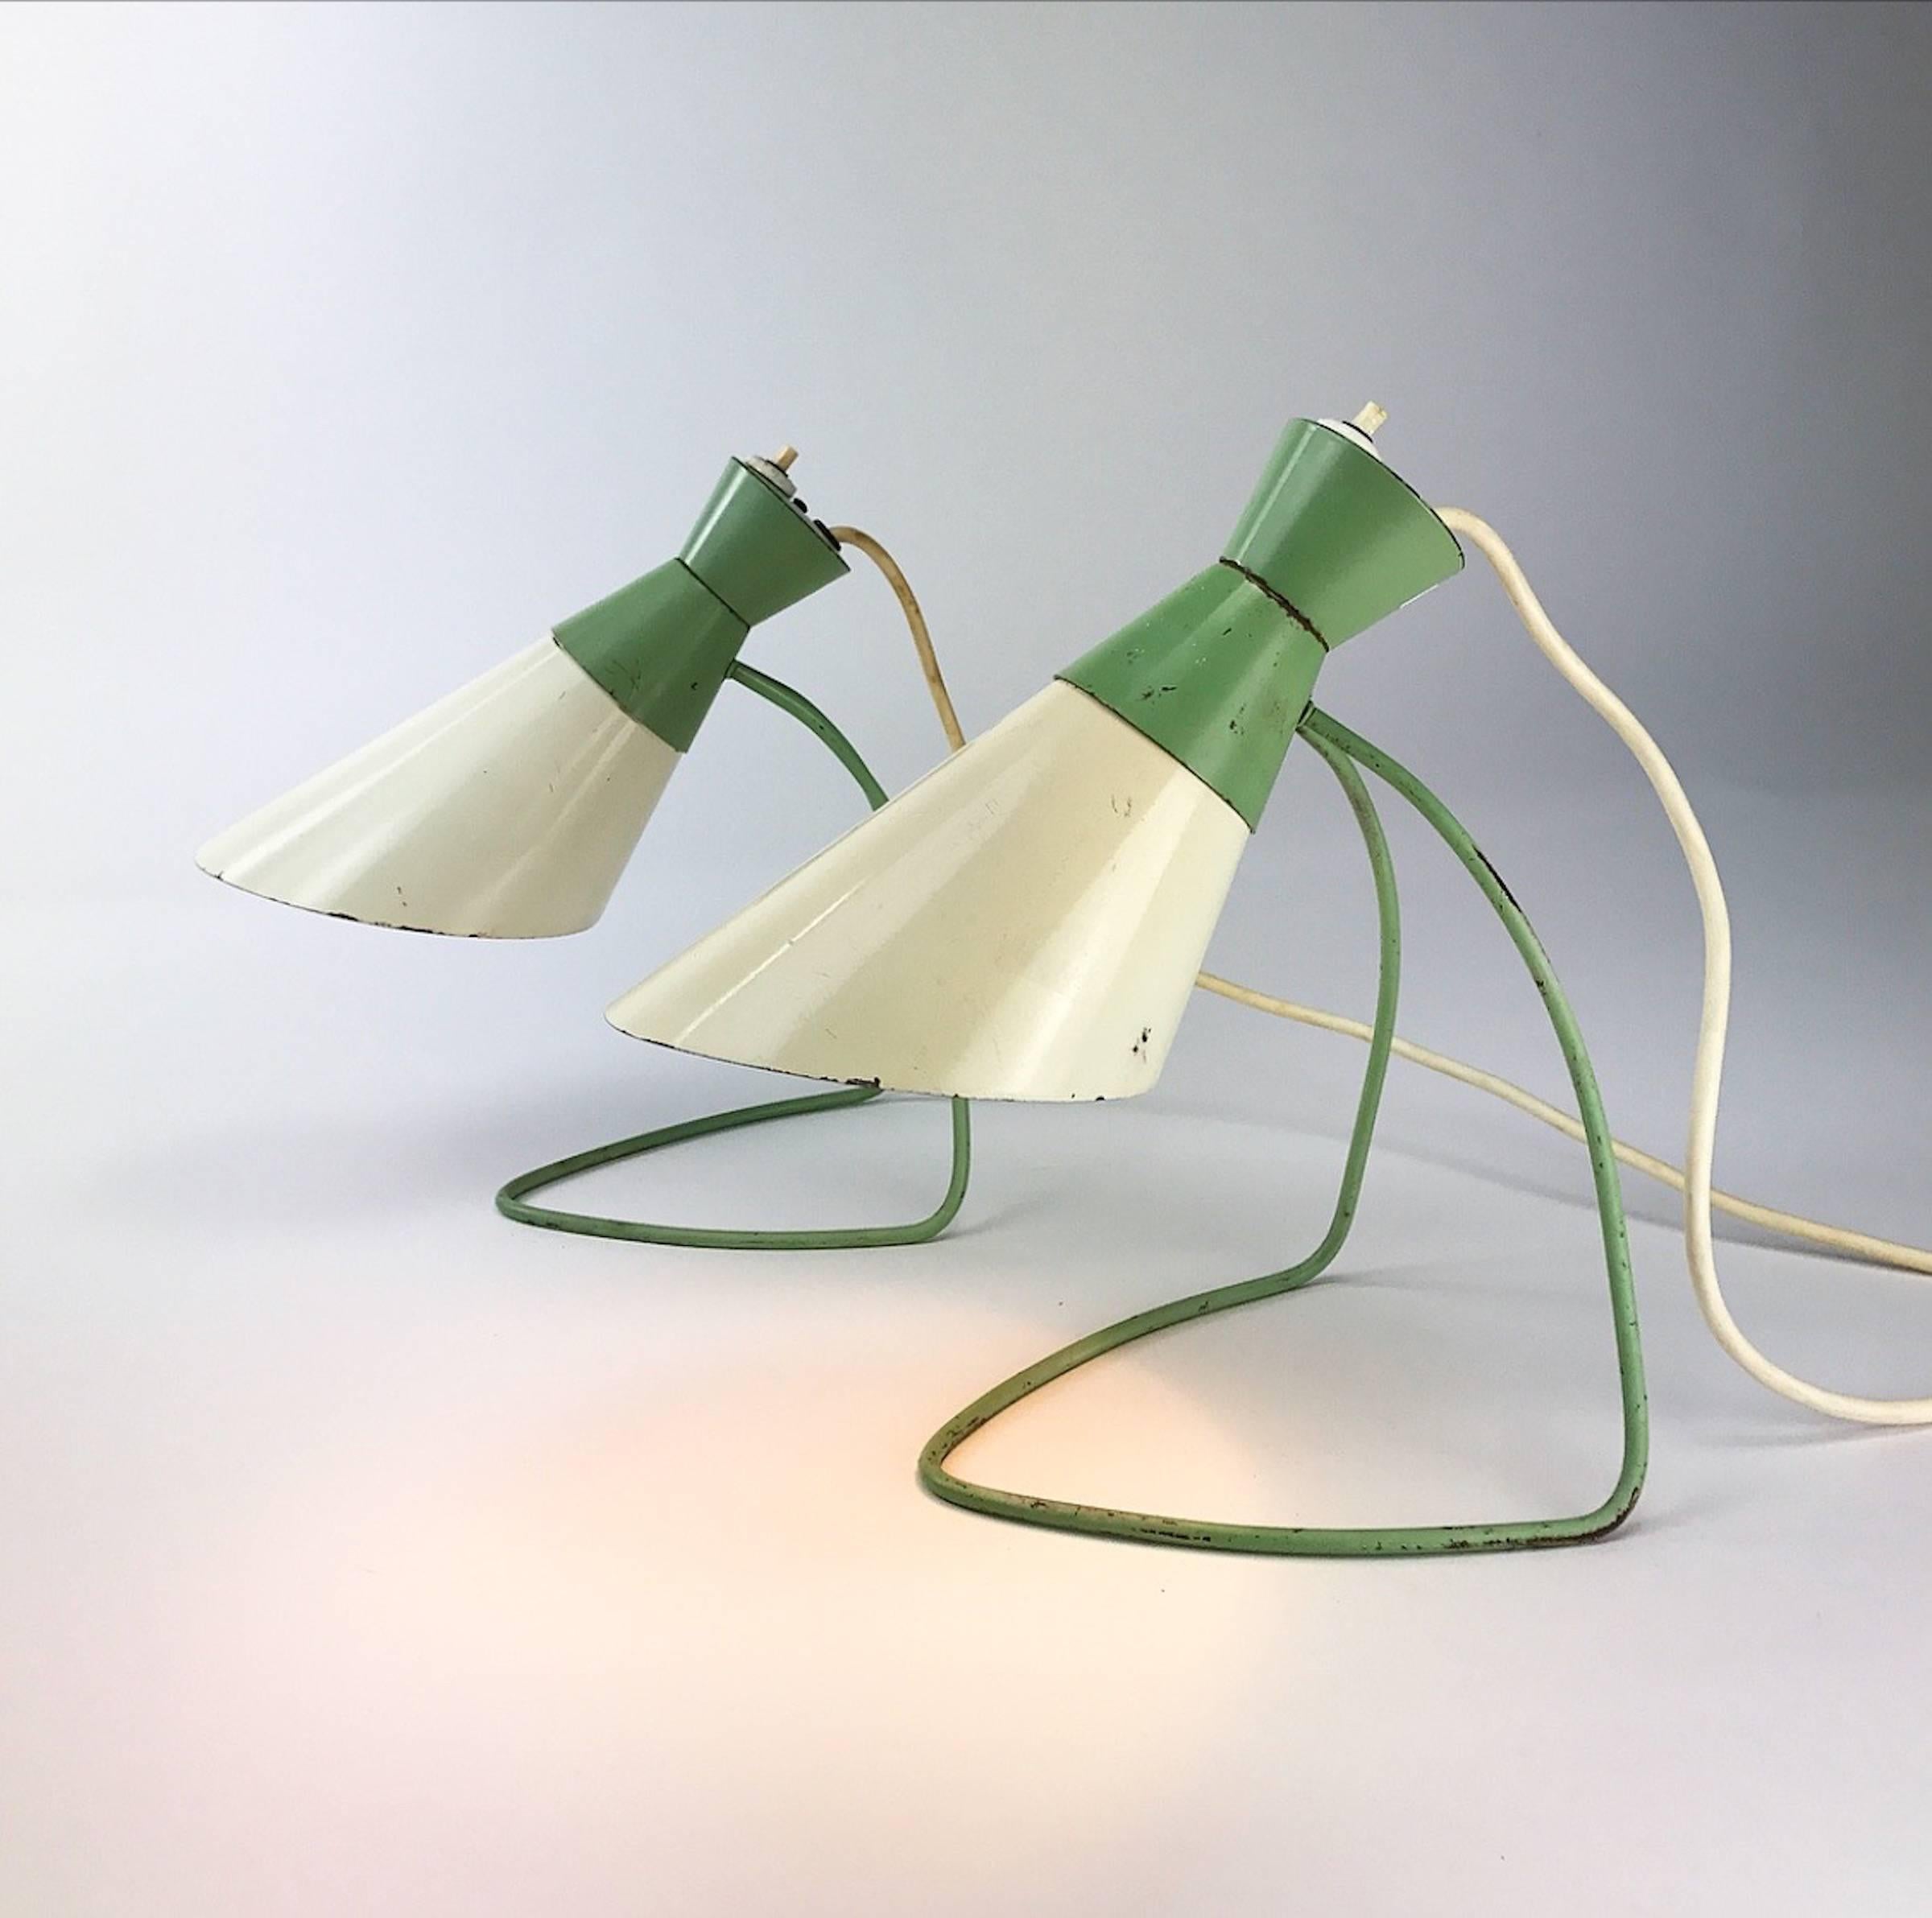 Czech Rare Set of Table Lamps by Josef Hurka for Napako, 1958